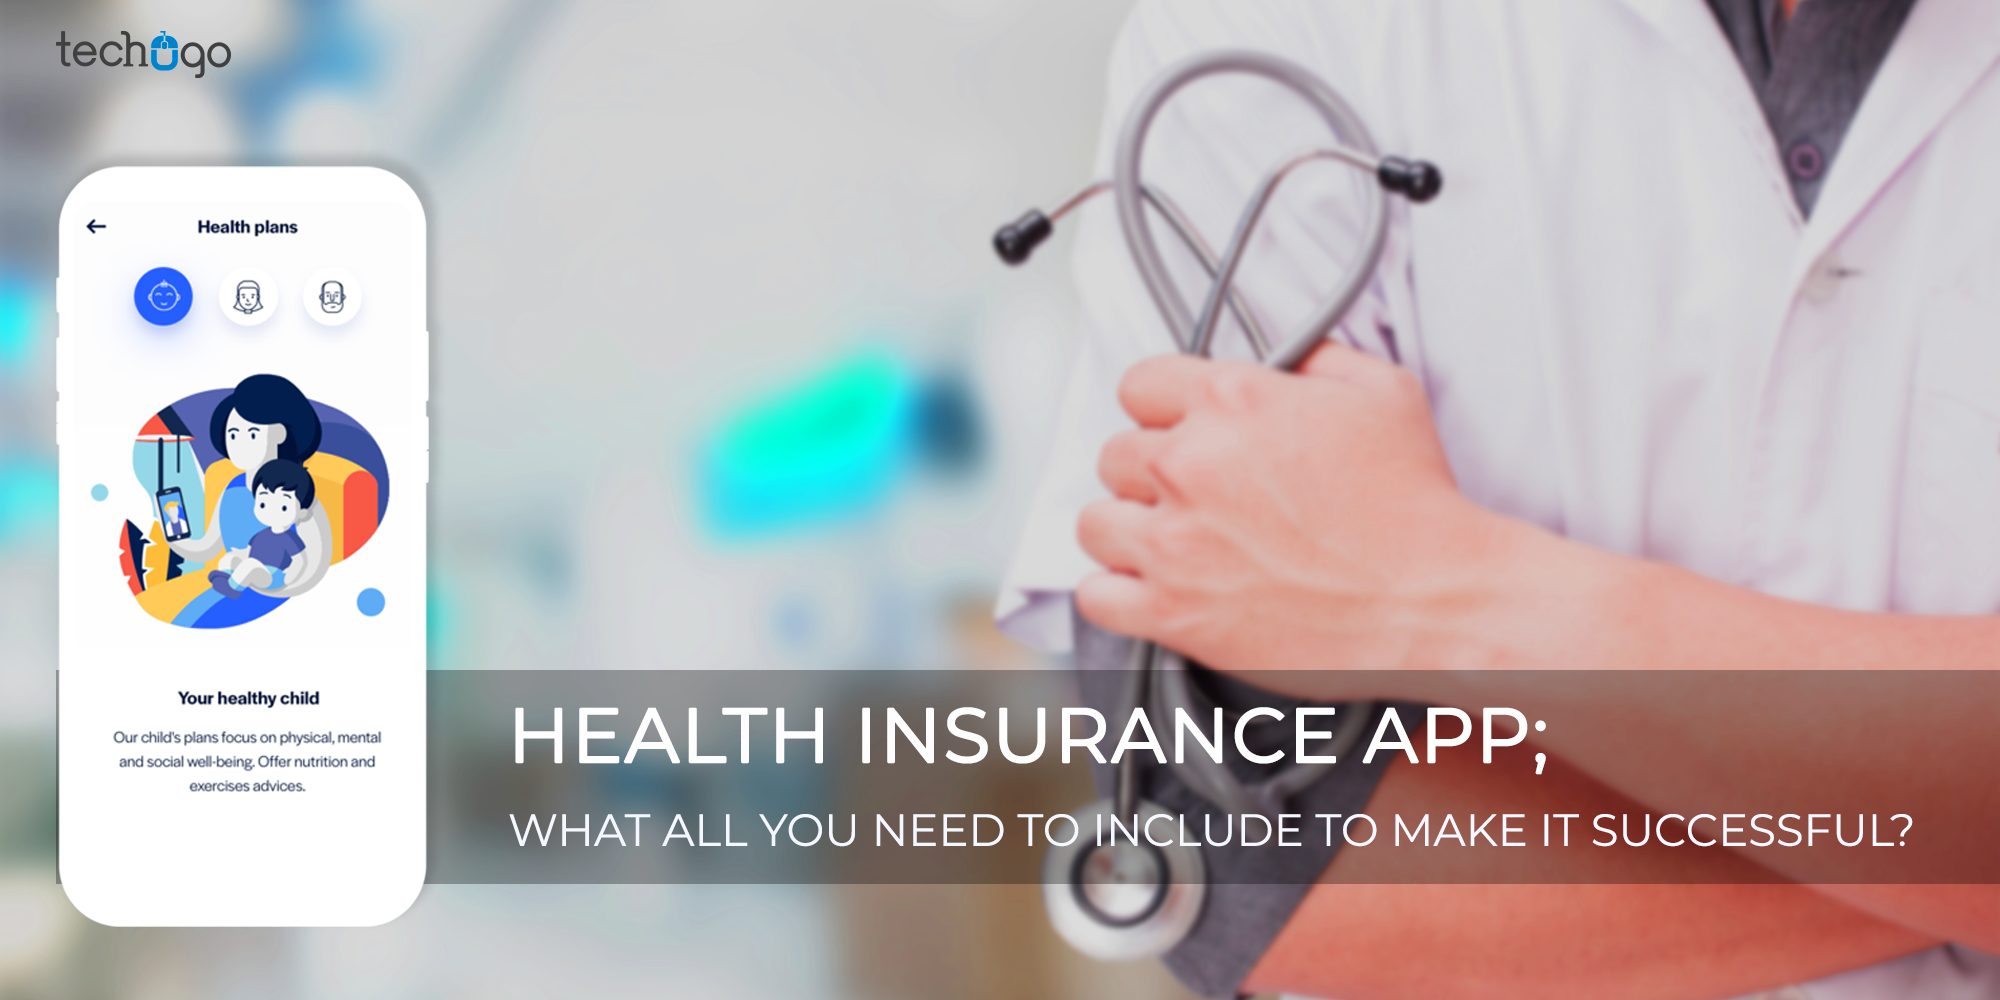 Health Insurance App What All You Need To Include To Make It Successful?